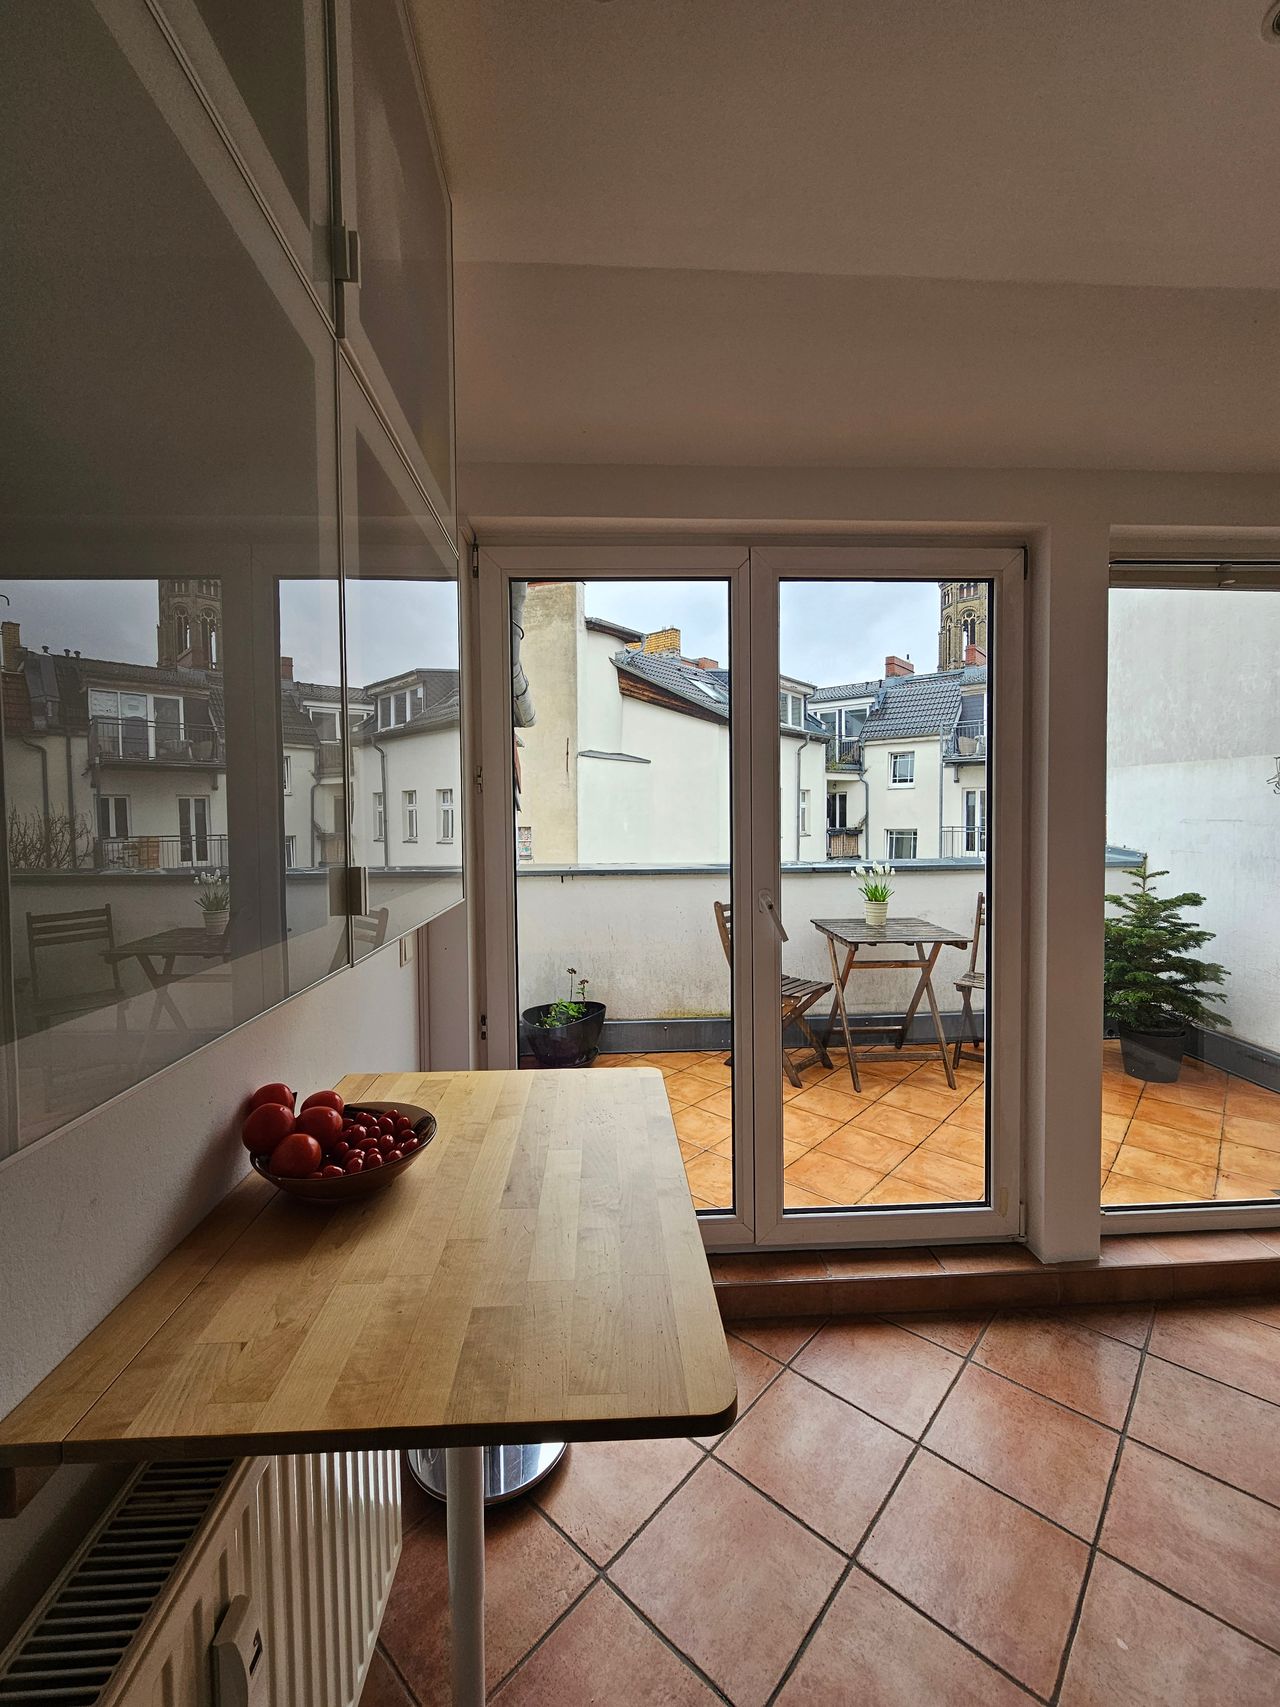 Exquisite 4-Room Duplex with a balcony and 2 Terraces in the Heart of Prenzlauer Berg/Mitte, 2 minutes from Zionskirche and Kastanienallee